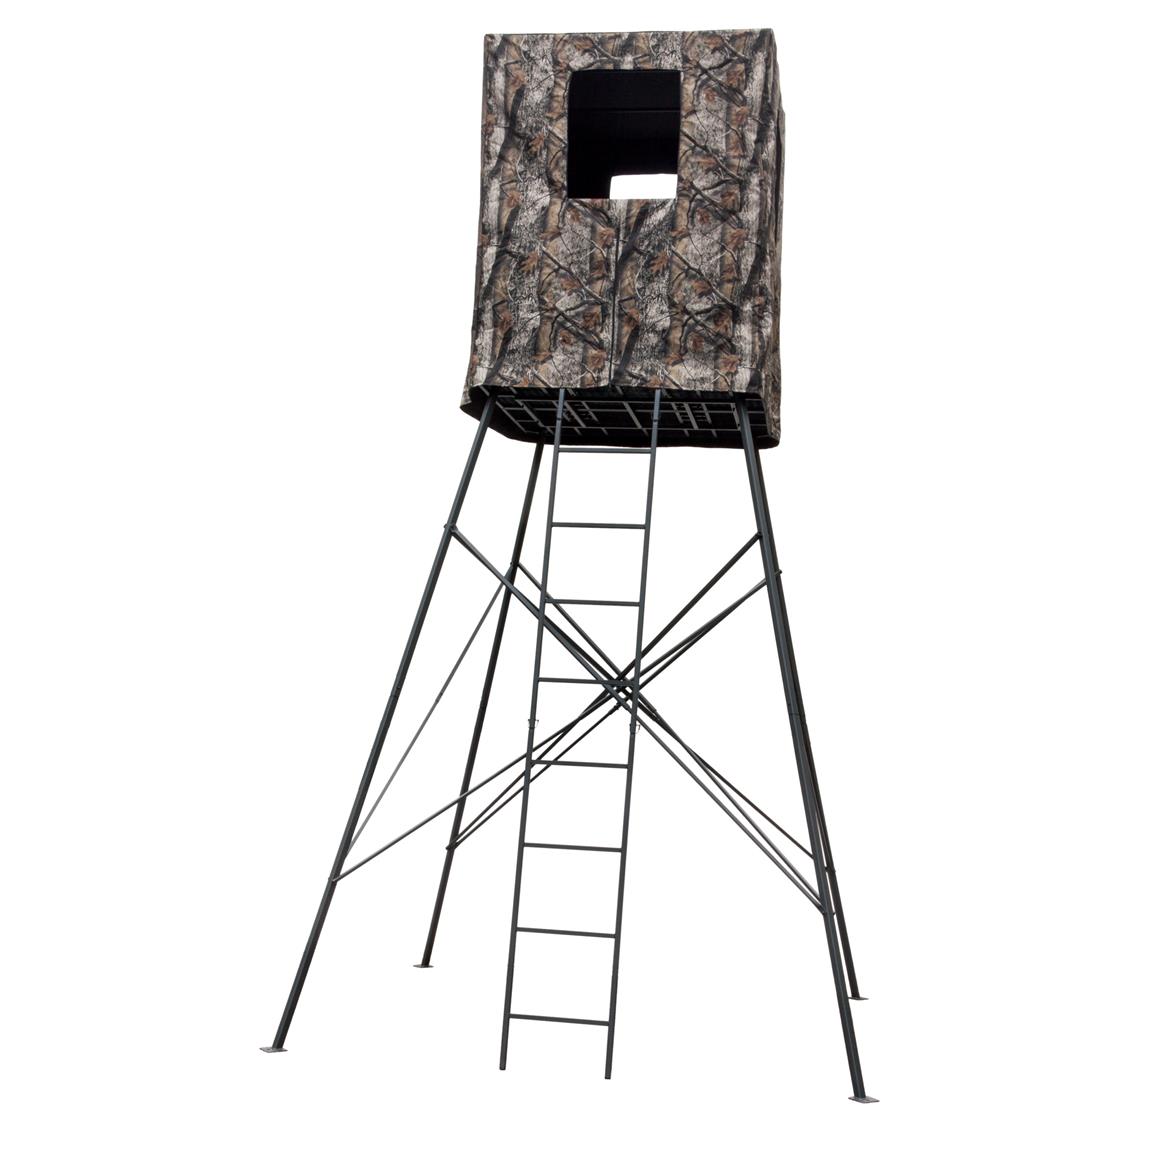 Big Dog 12' Quad Pod 2person Deer Stand with Enclosure, BDT512 649091, Tower & Tripod Stands